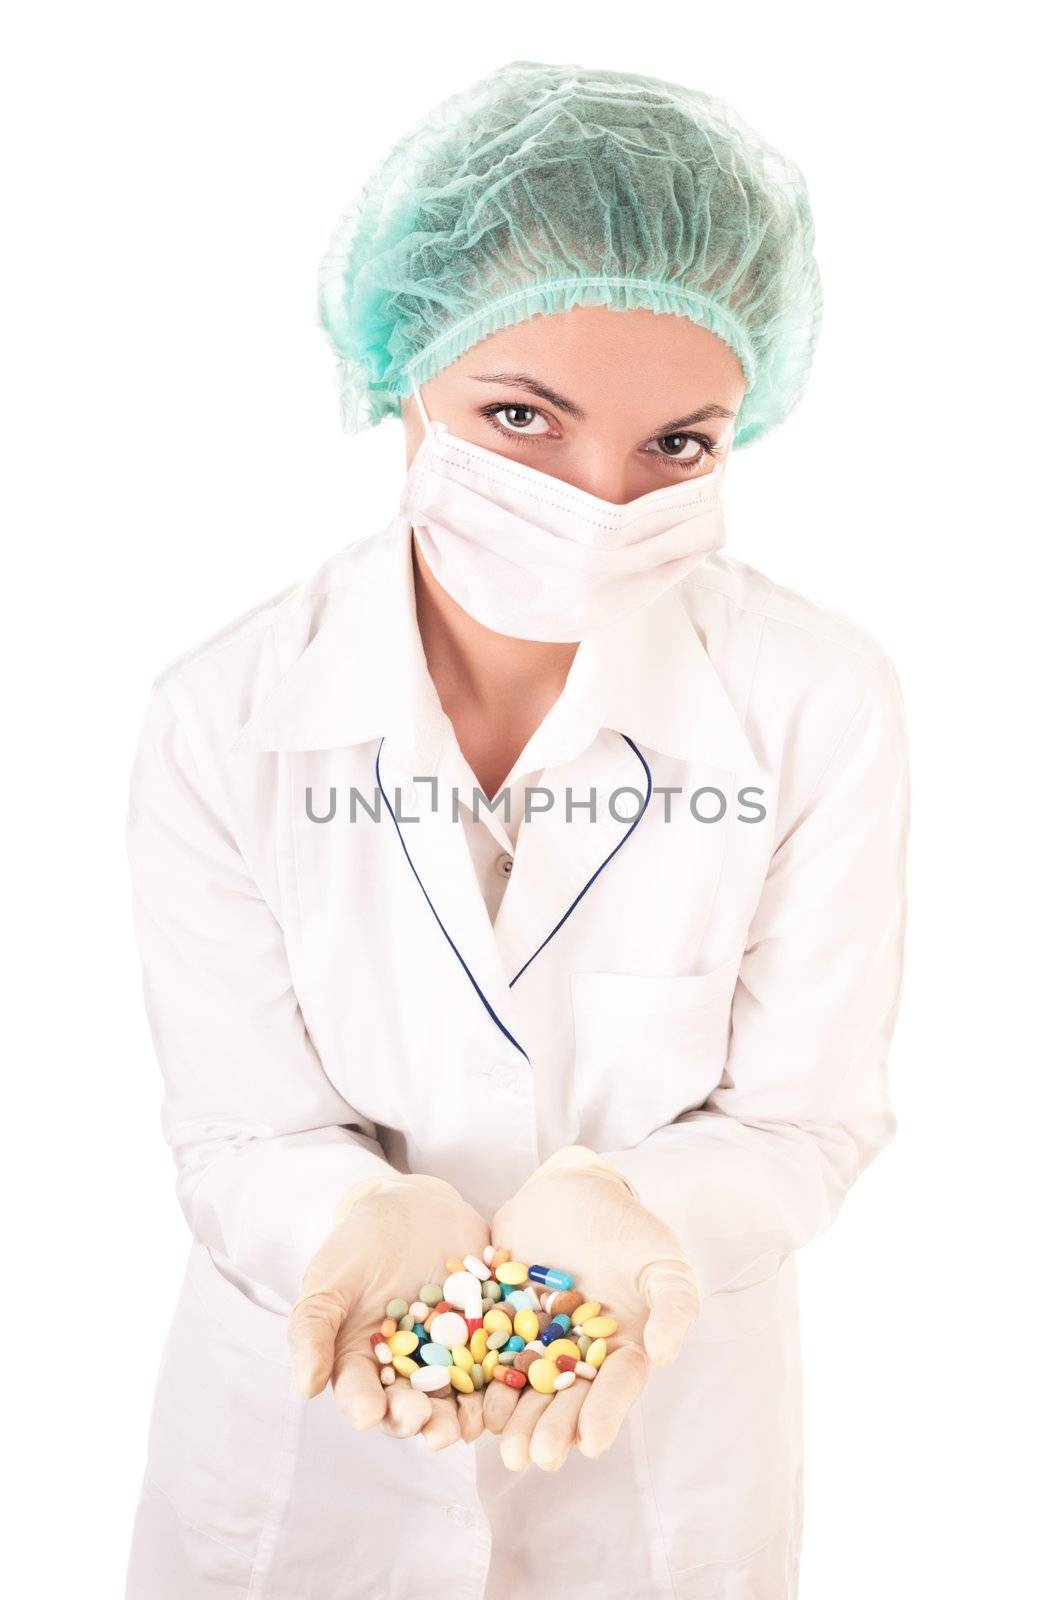 Serious doctor with pills in hands isolated on white background